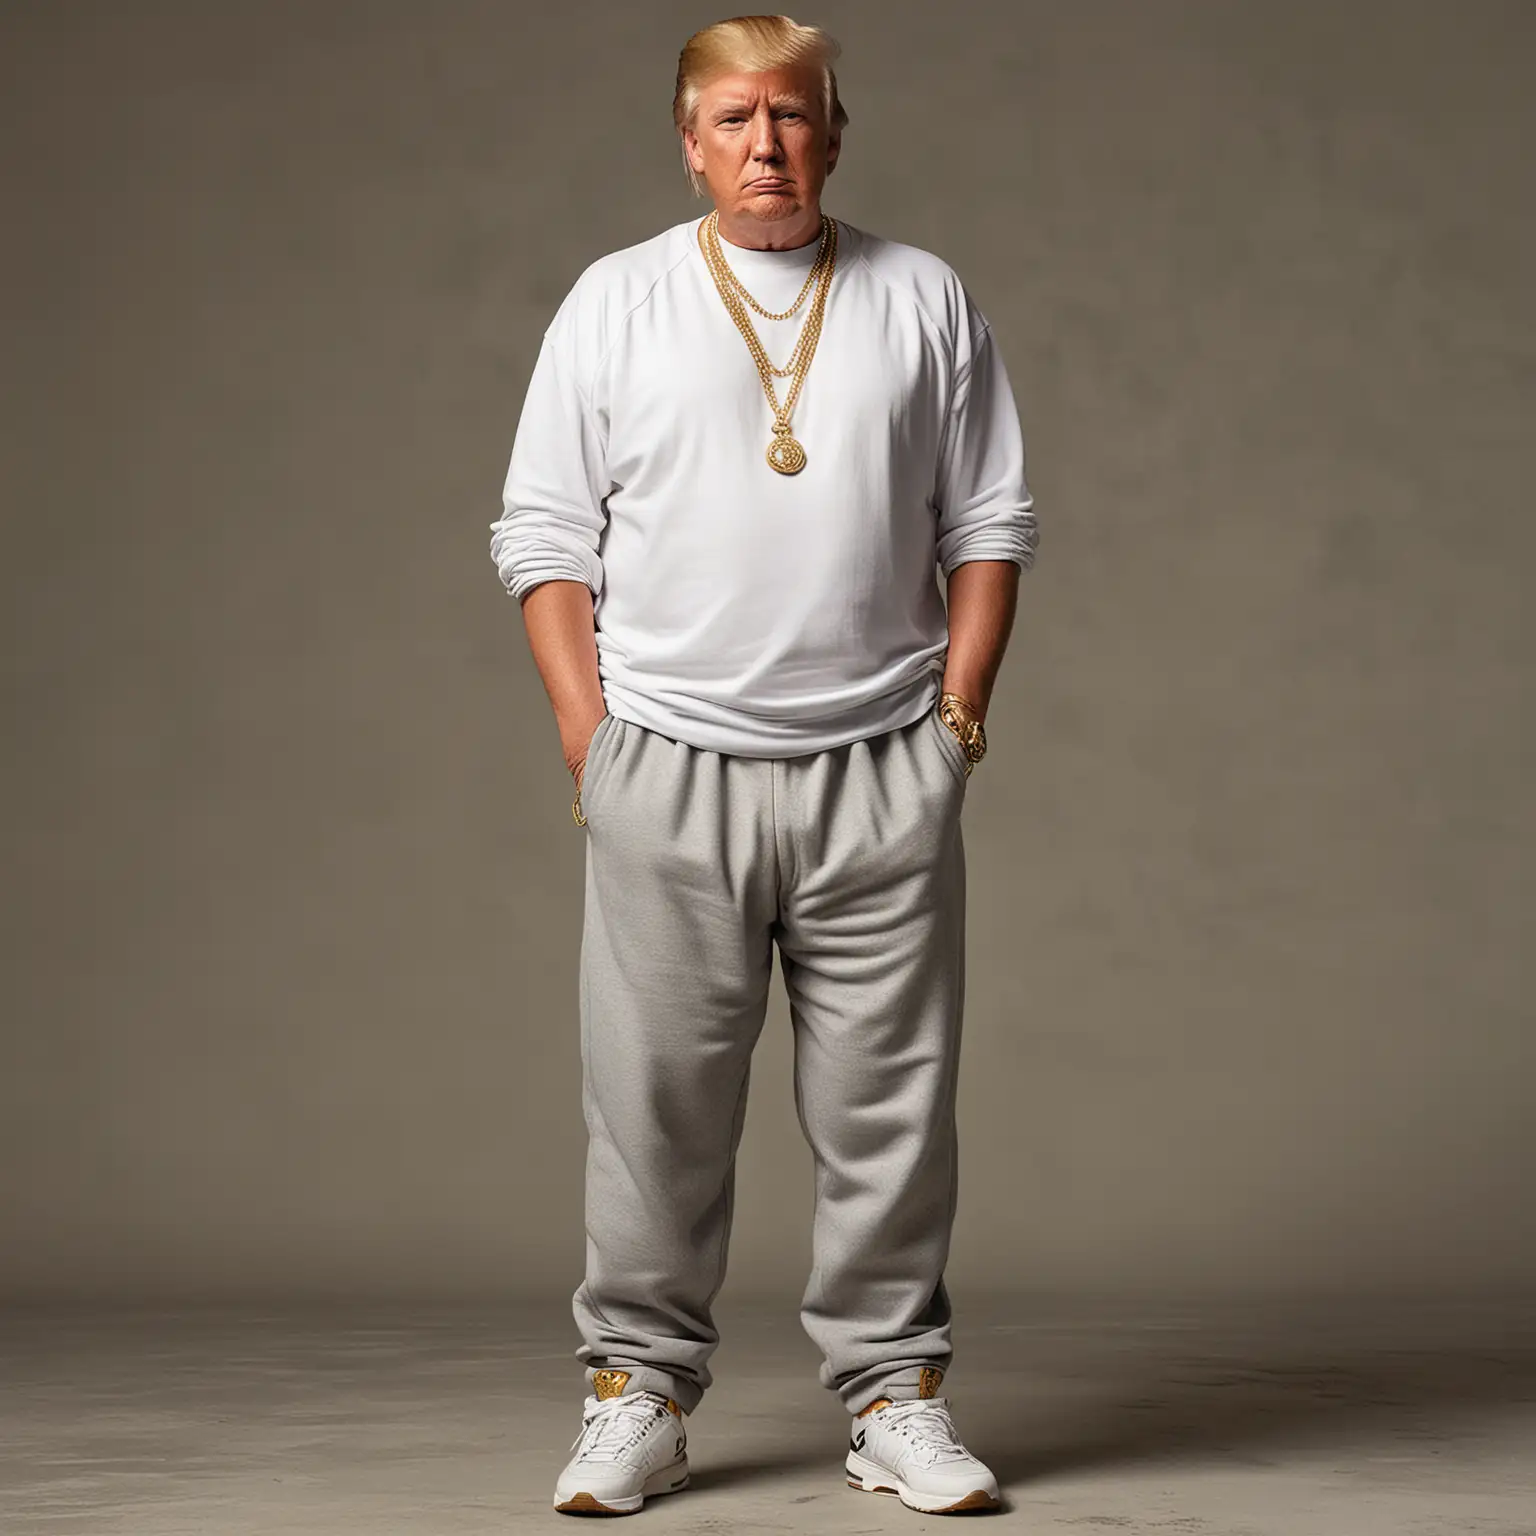 Donald-Trump-in-Casual-Baggy-Sweatpants-and-Gold-Chain